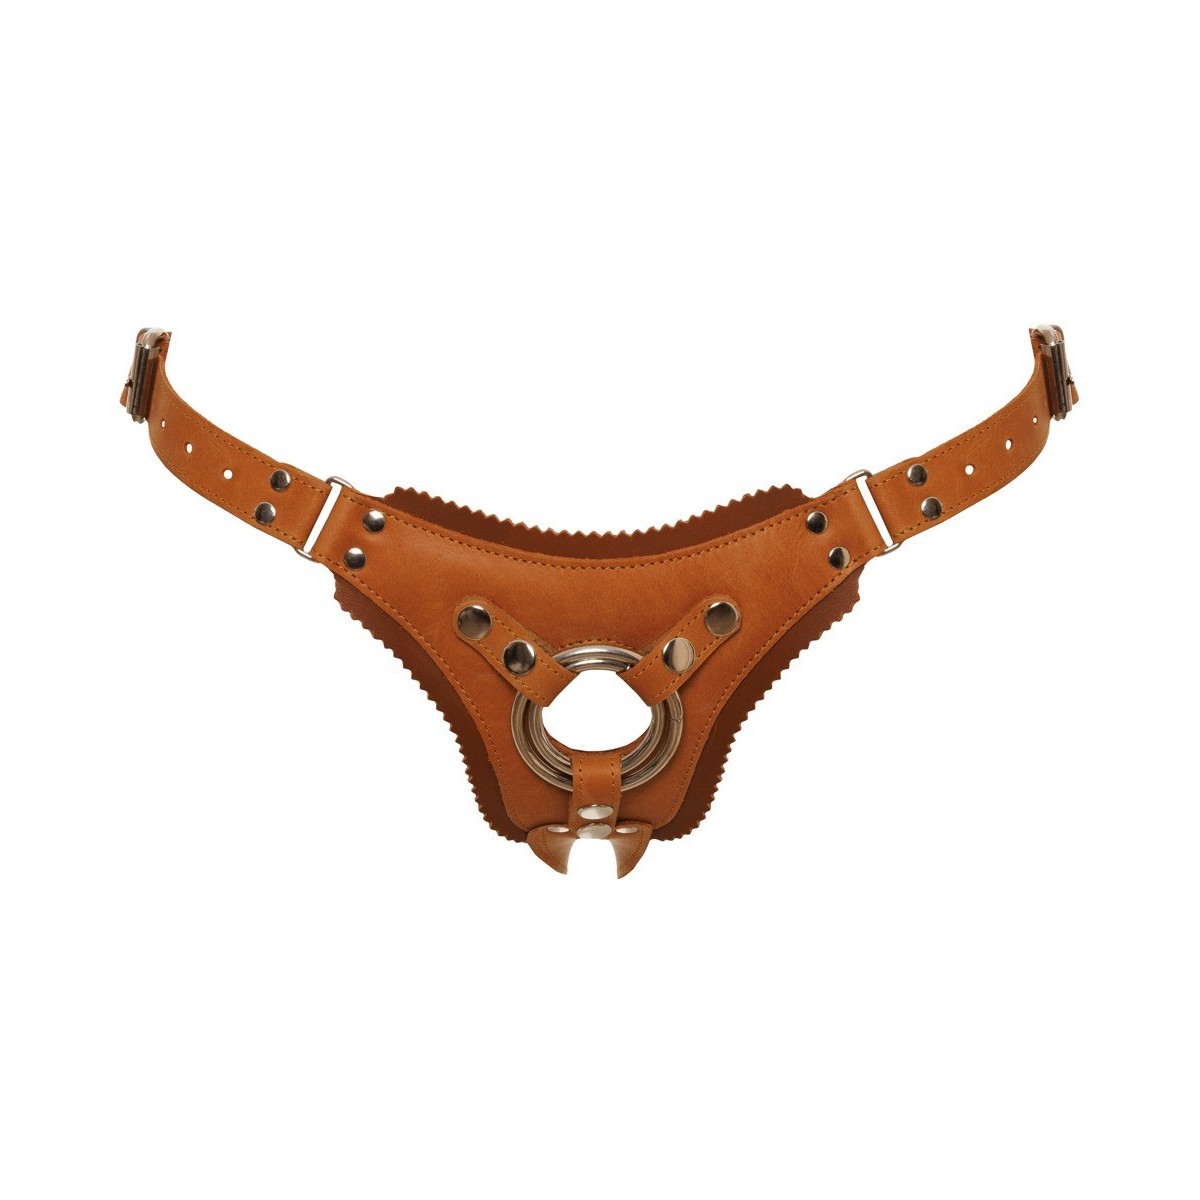 Cintura strap on Leather Strap-on Harness